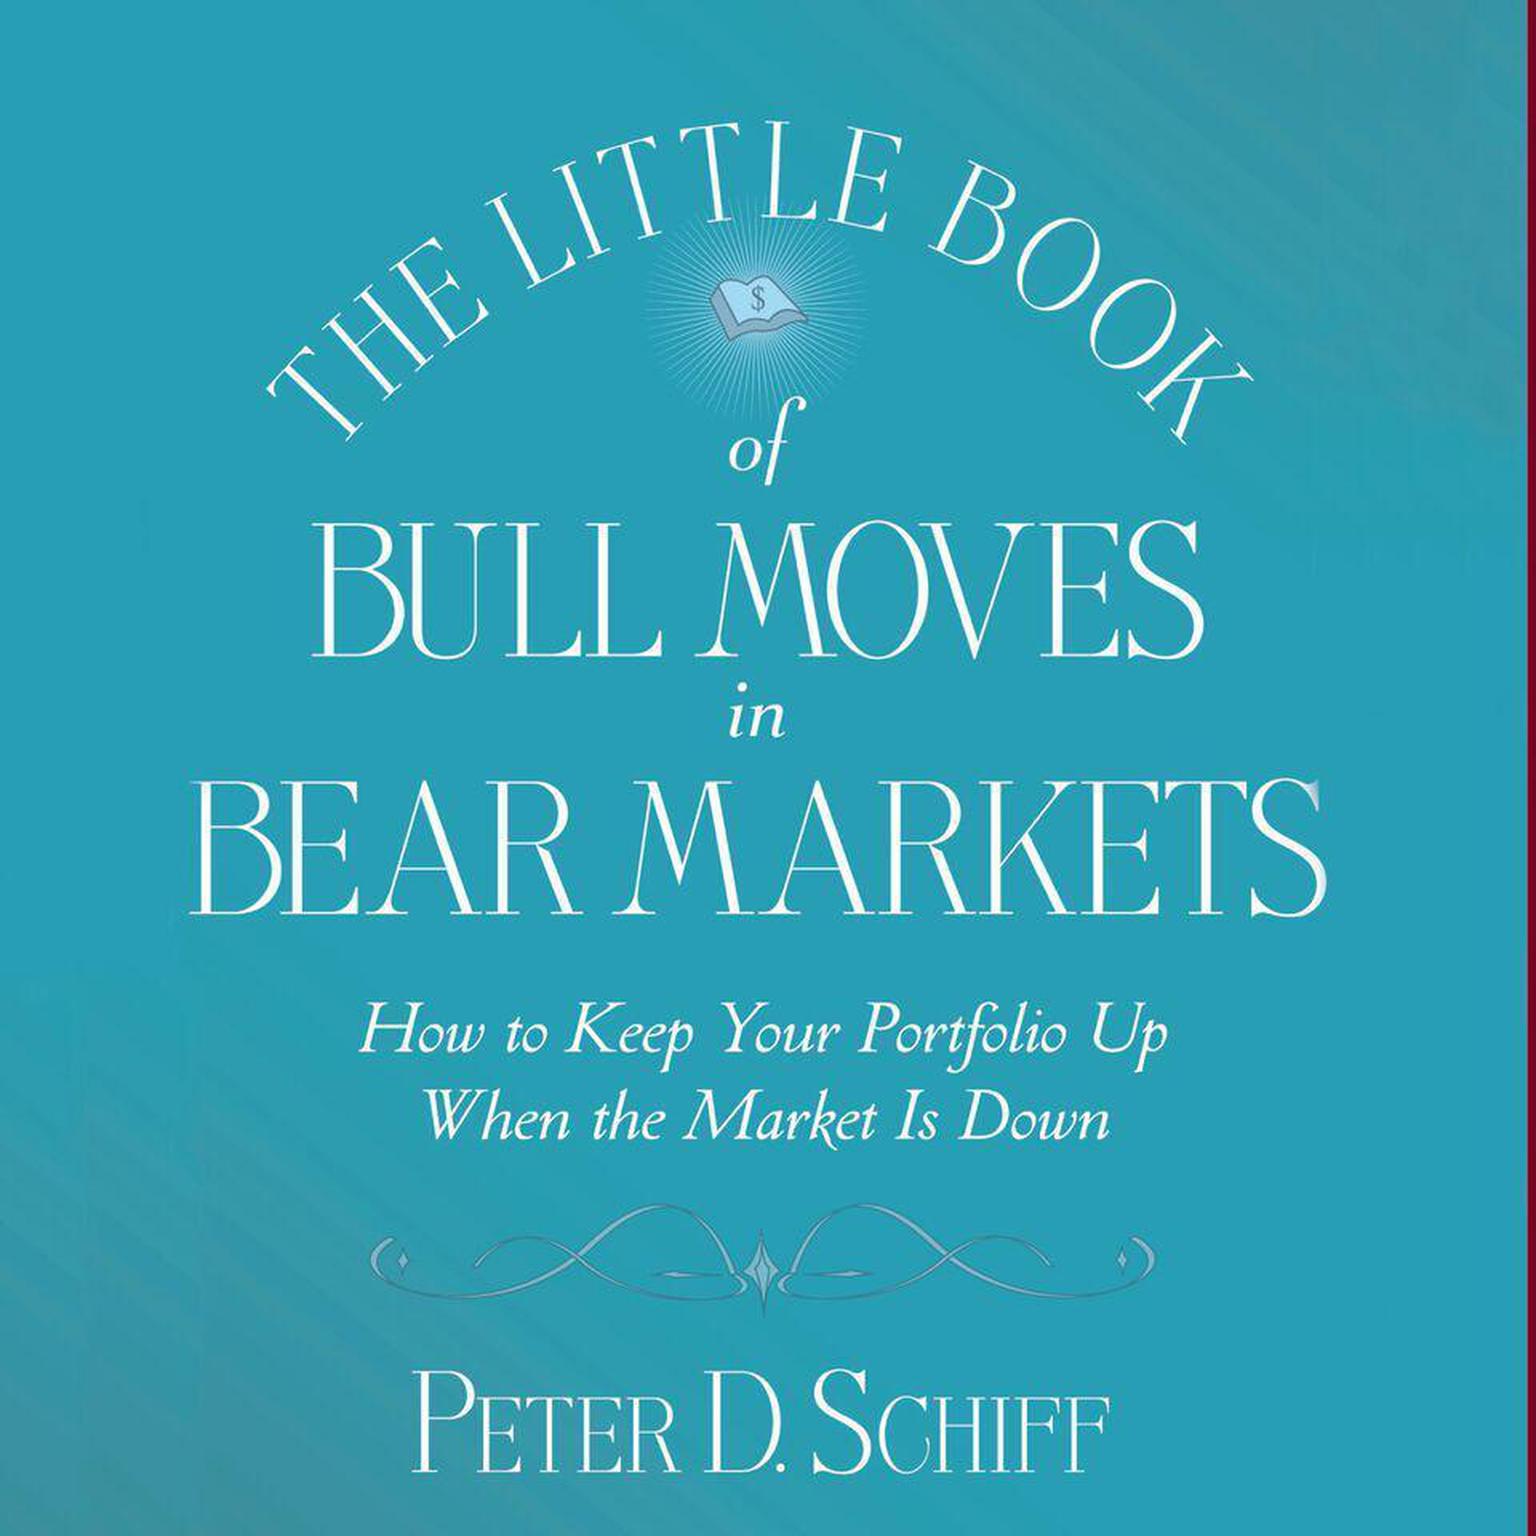 The Little Book of Bull Moves in Bear Markets: How to Keep Your Portfolio Up When the Market is Down Audiobook, by Peter D. Schiff